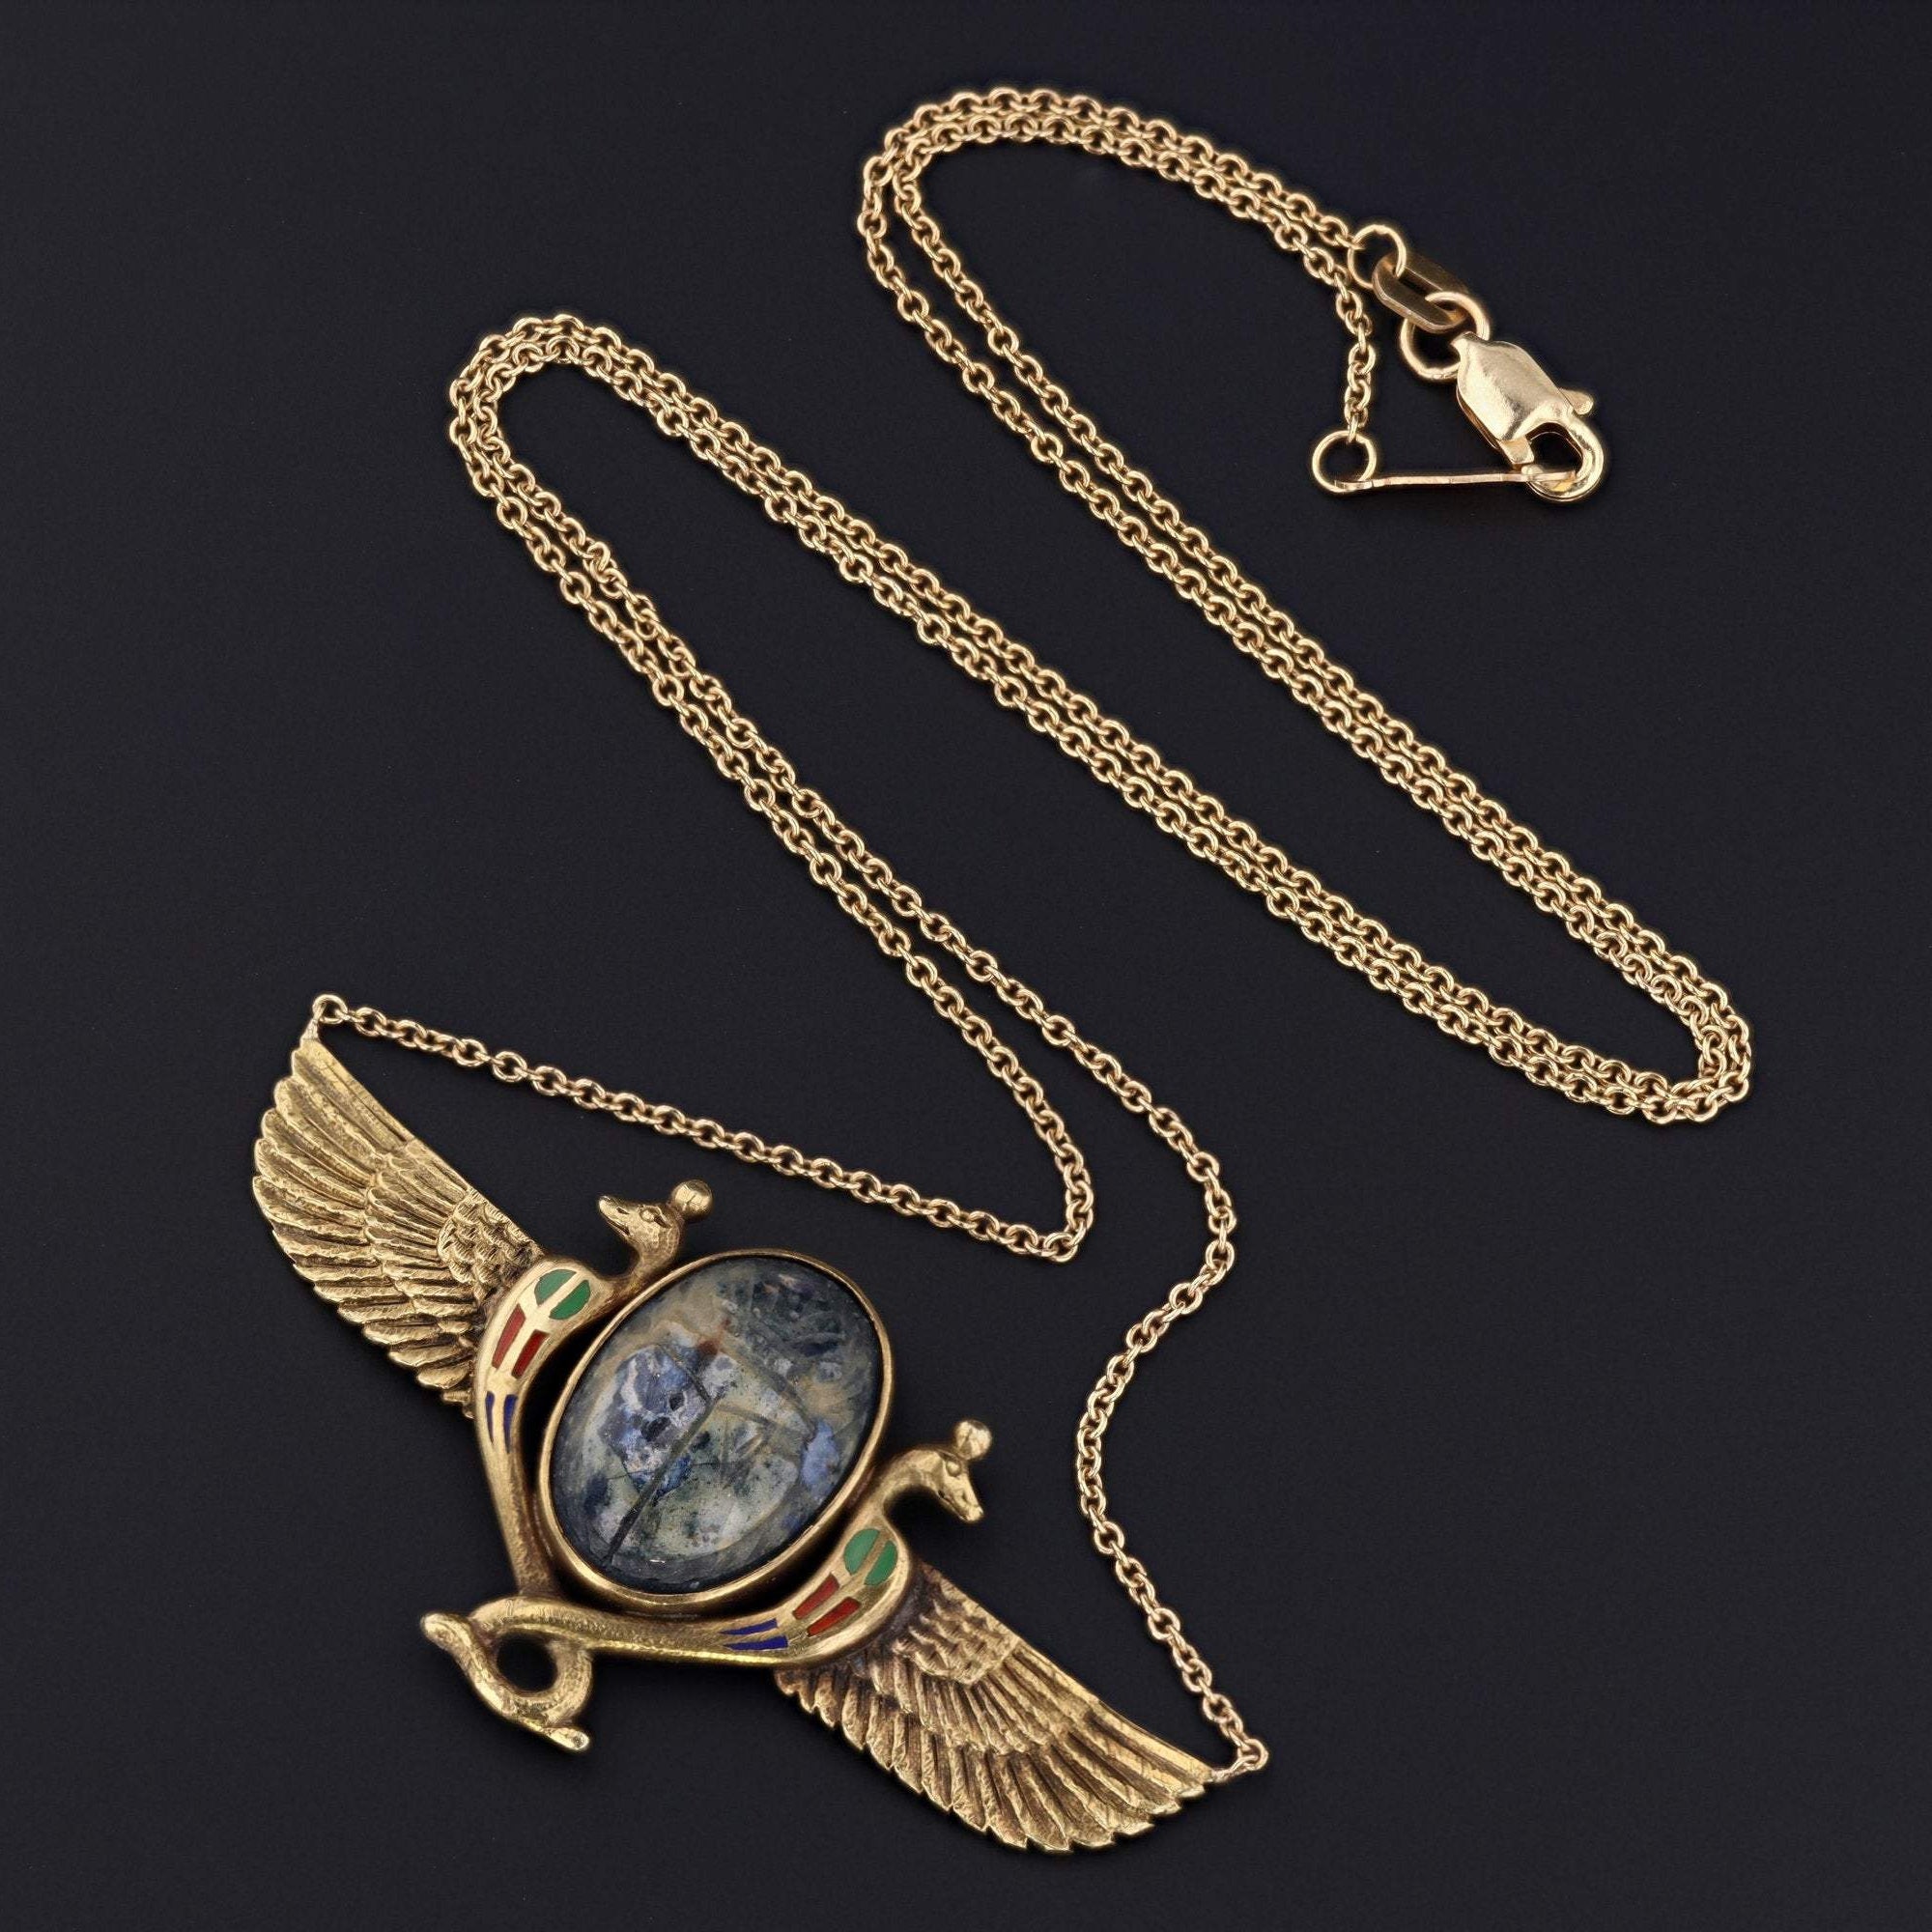 Egyptian Revival Necklace  | Antique Scarab Necklace | 14k Gold Necklace | Antique Pin Conversion Necklace